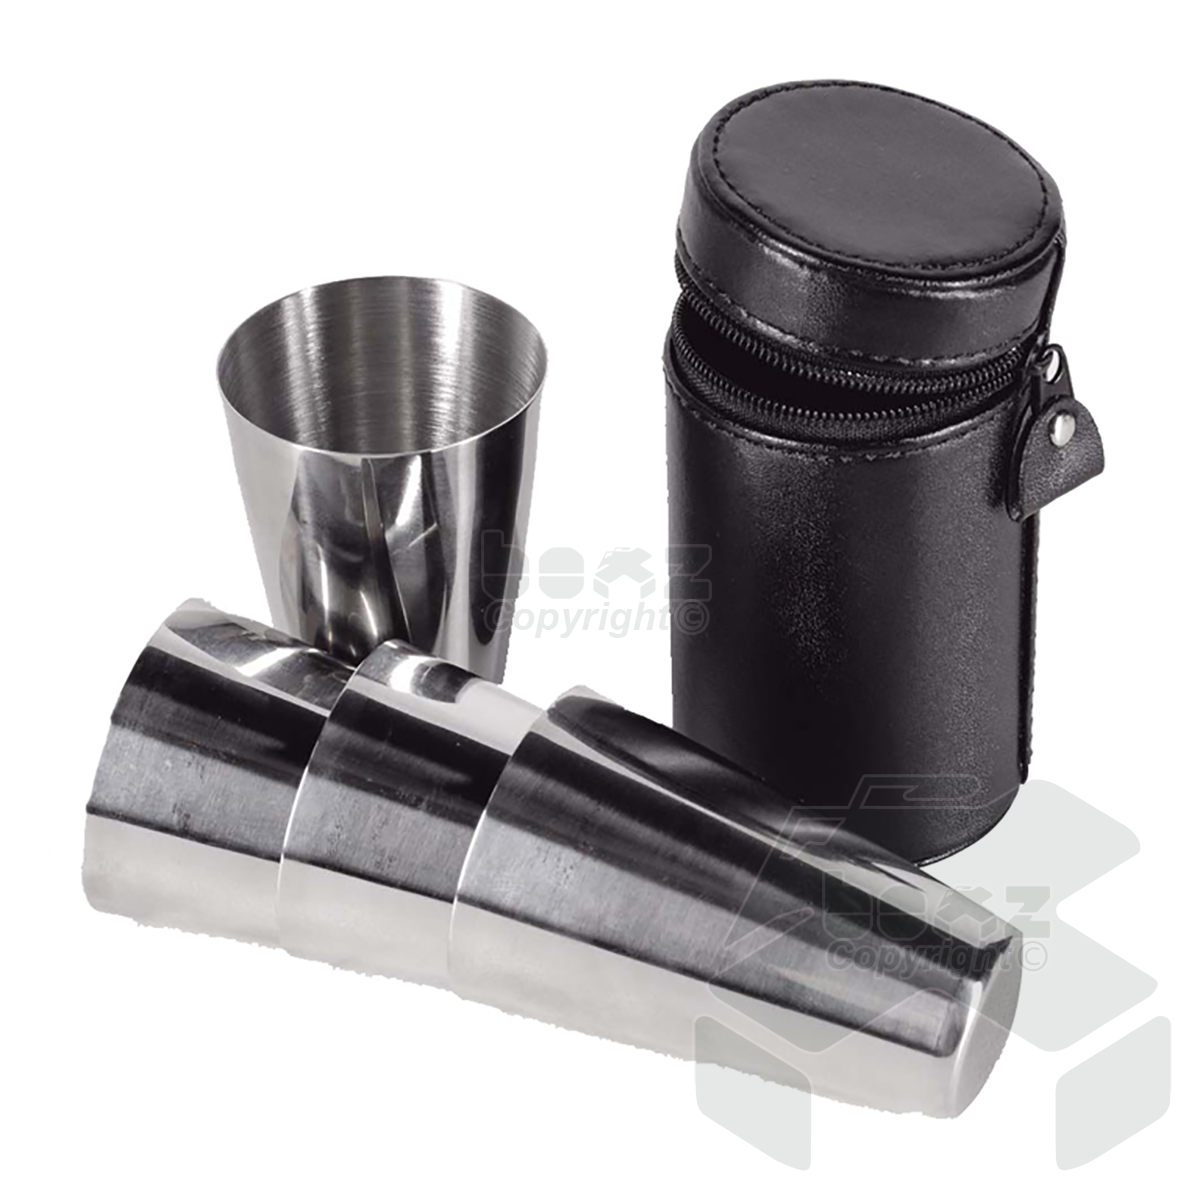 Bisley 2oz Cups Set of 4 Leather Case